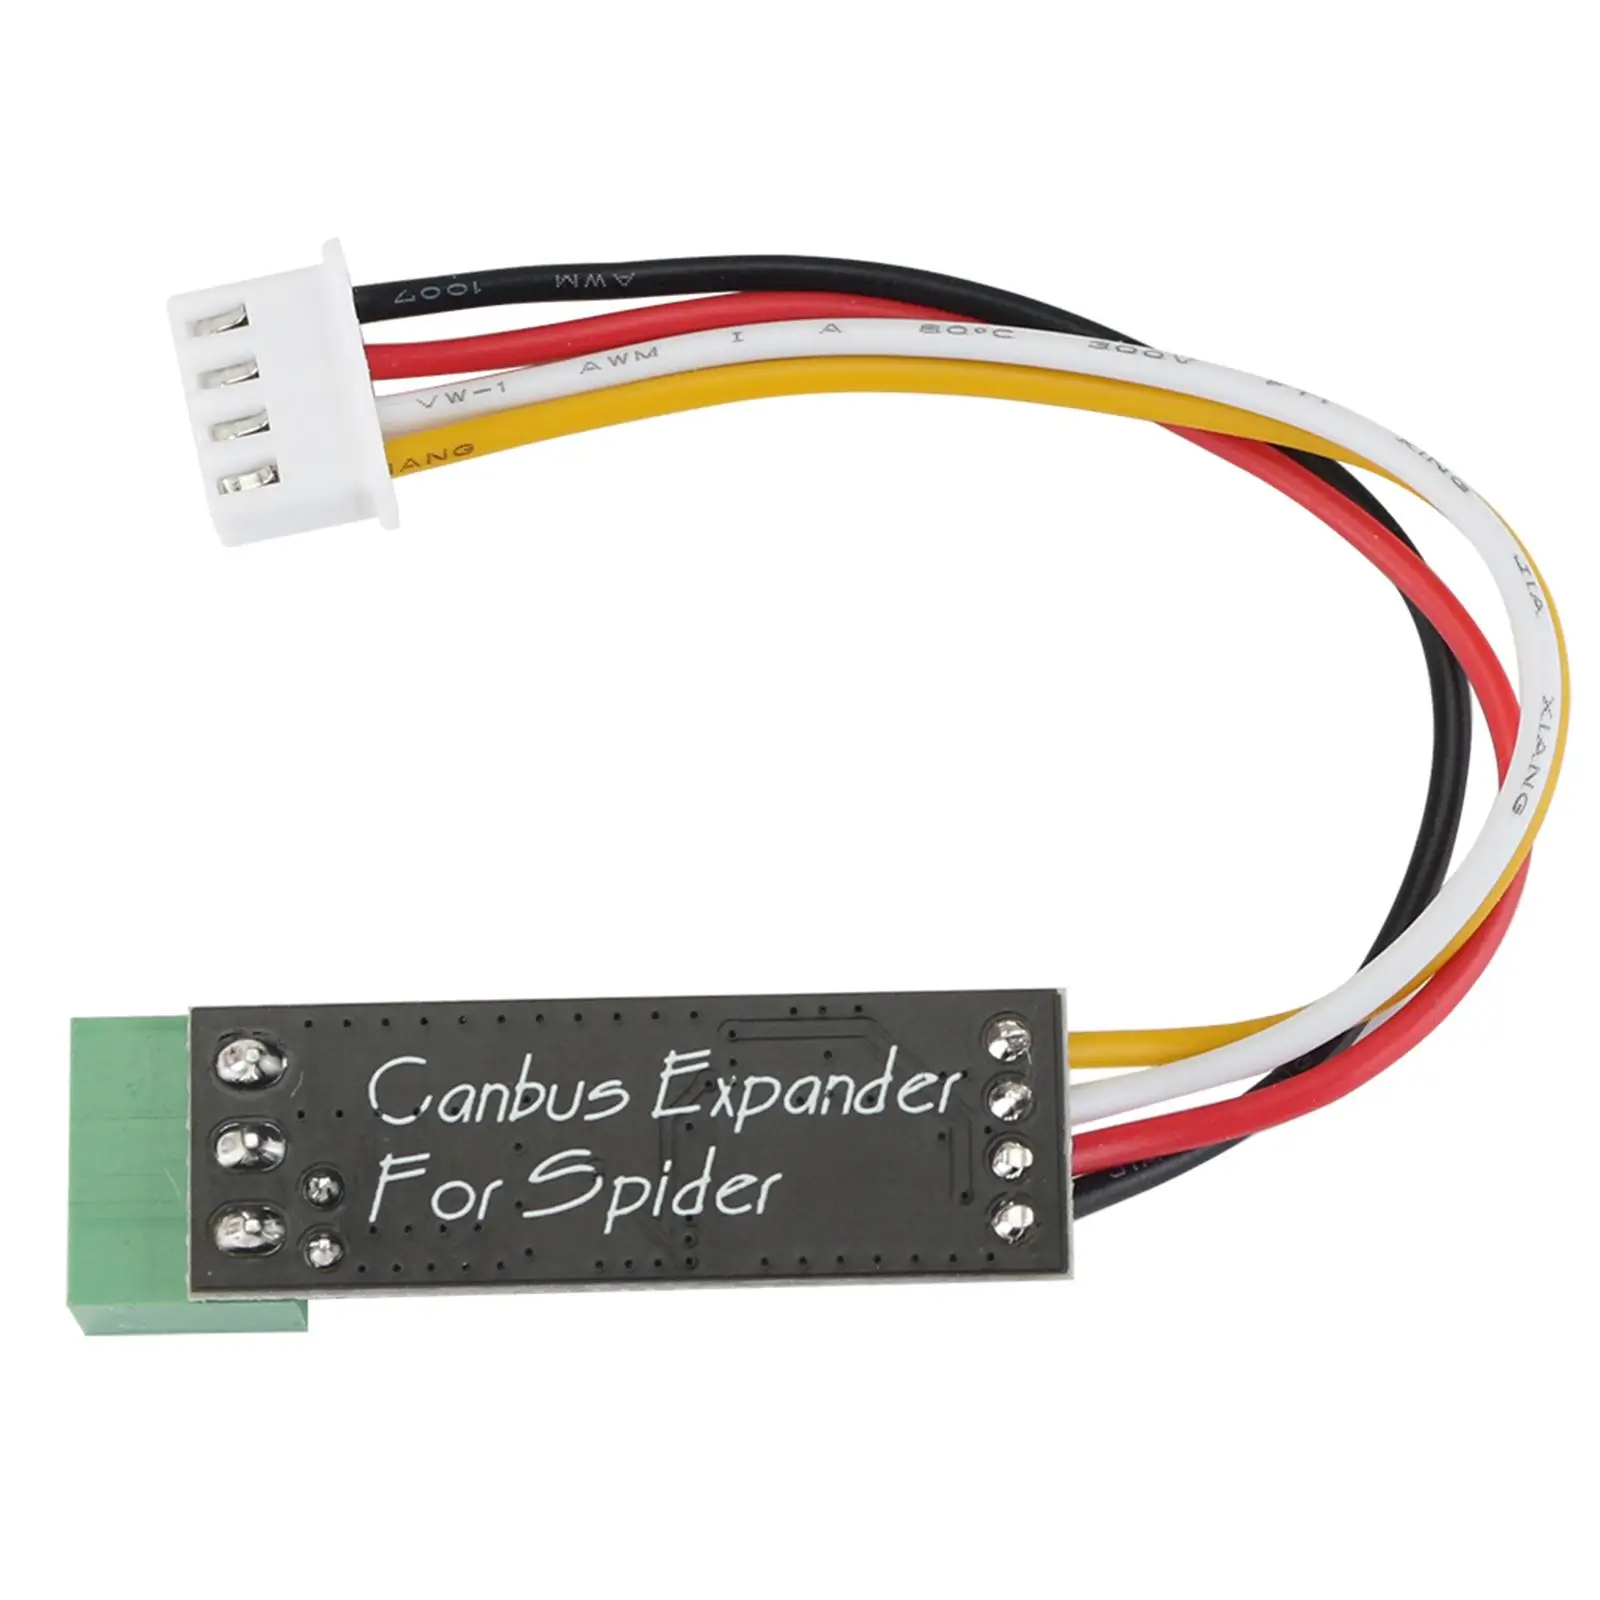 Canbus Expander Module Accessories Expansion Board Durable for Spider Board